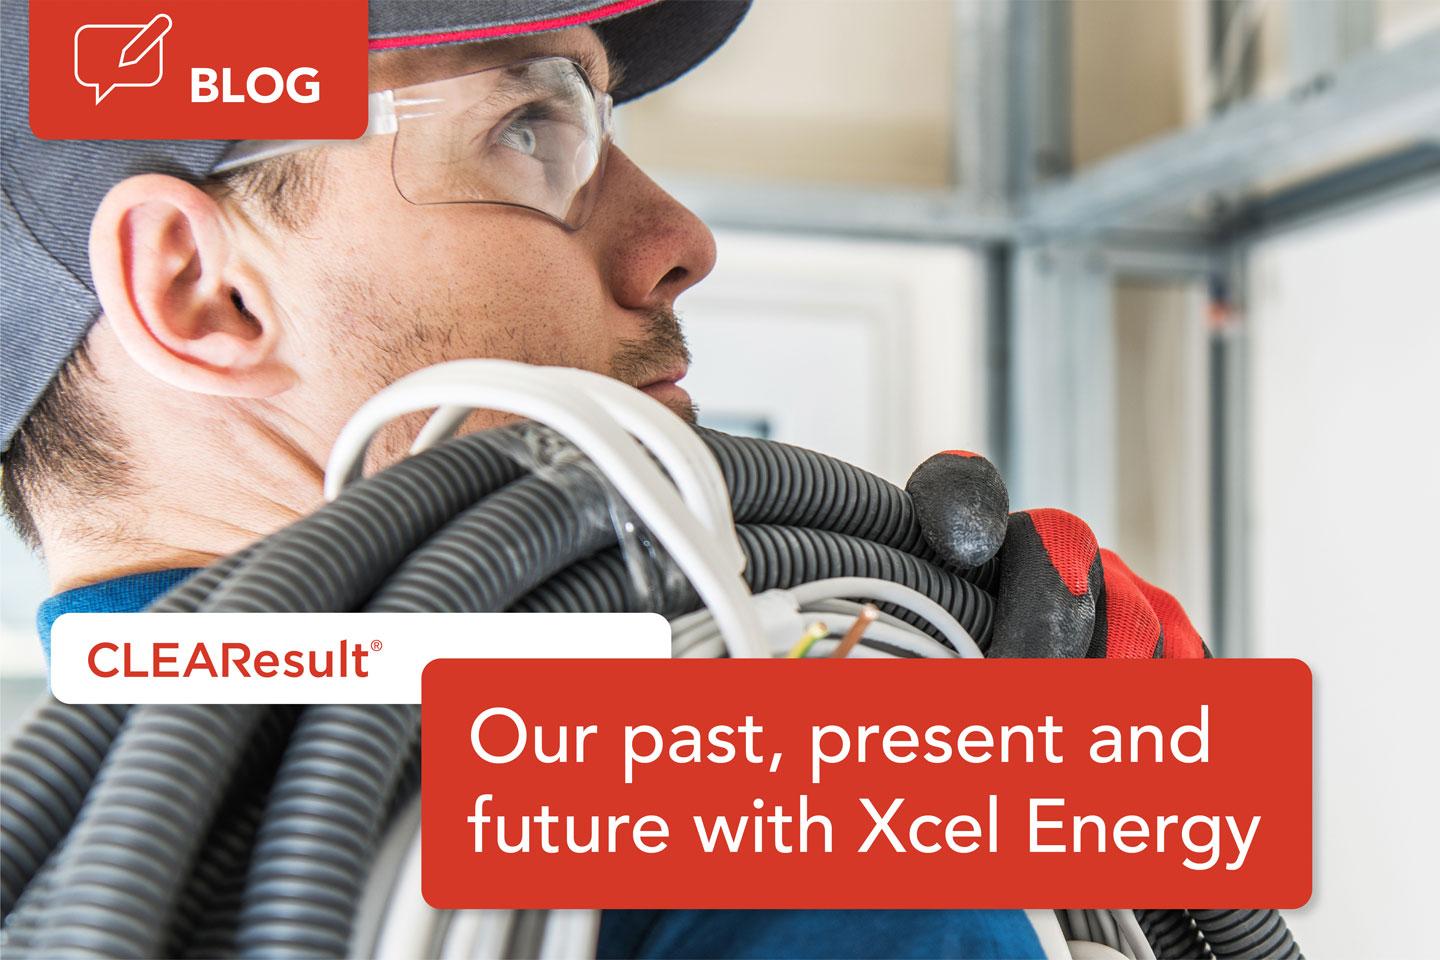 Our past, present and future with Xcel Energy